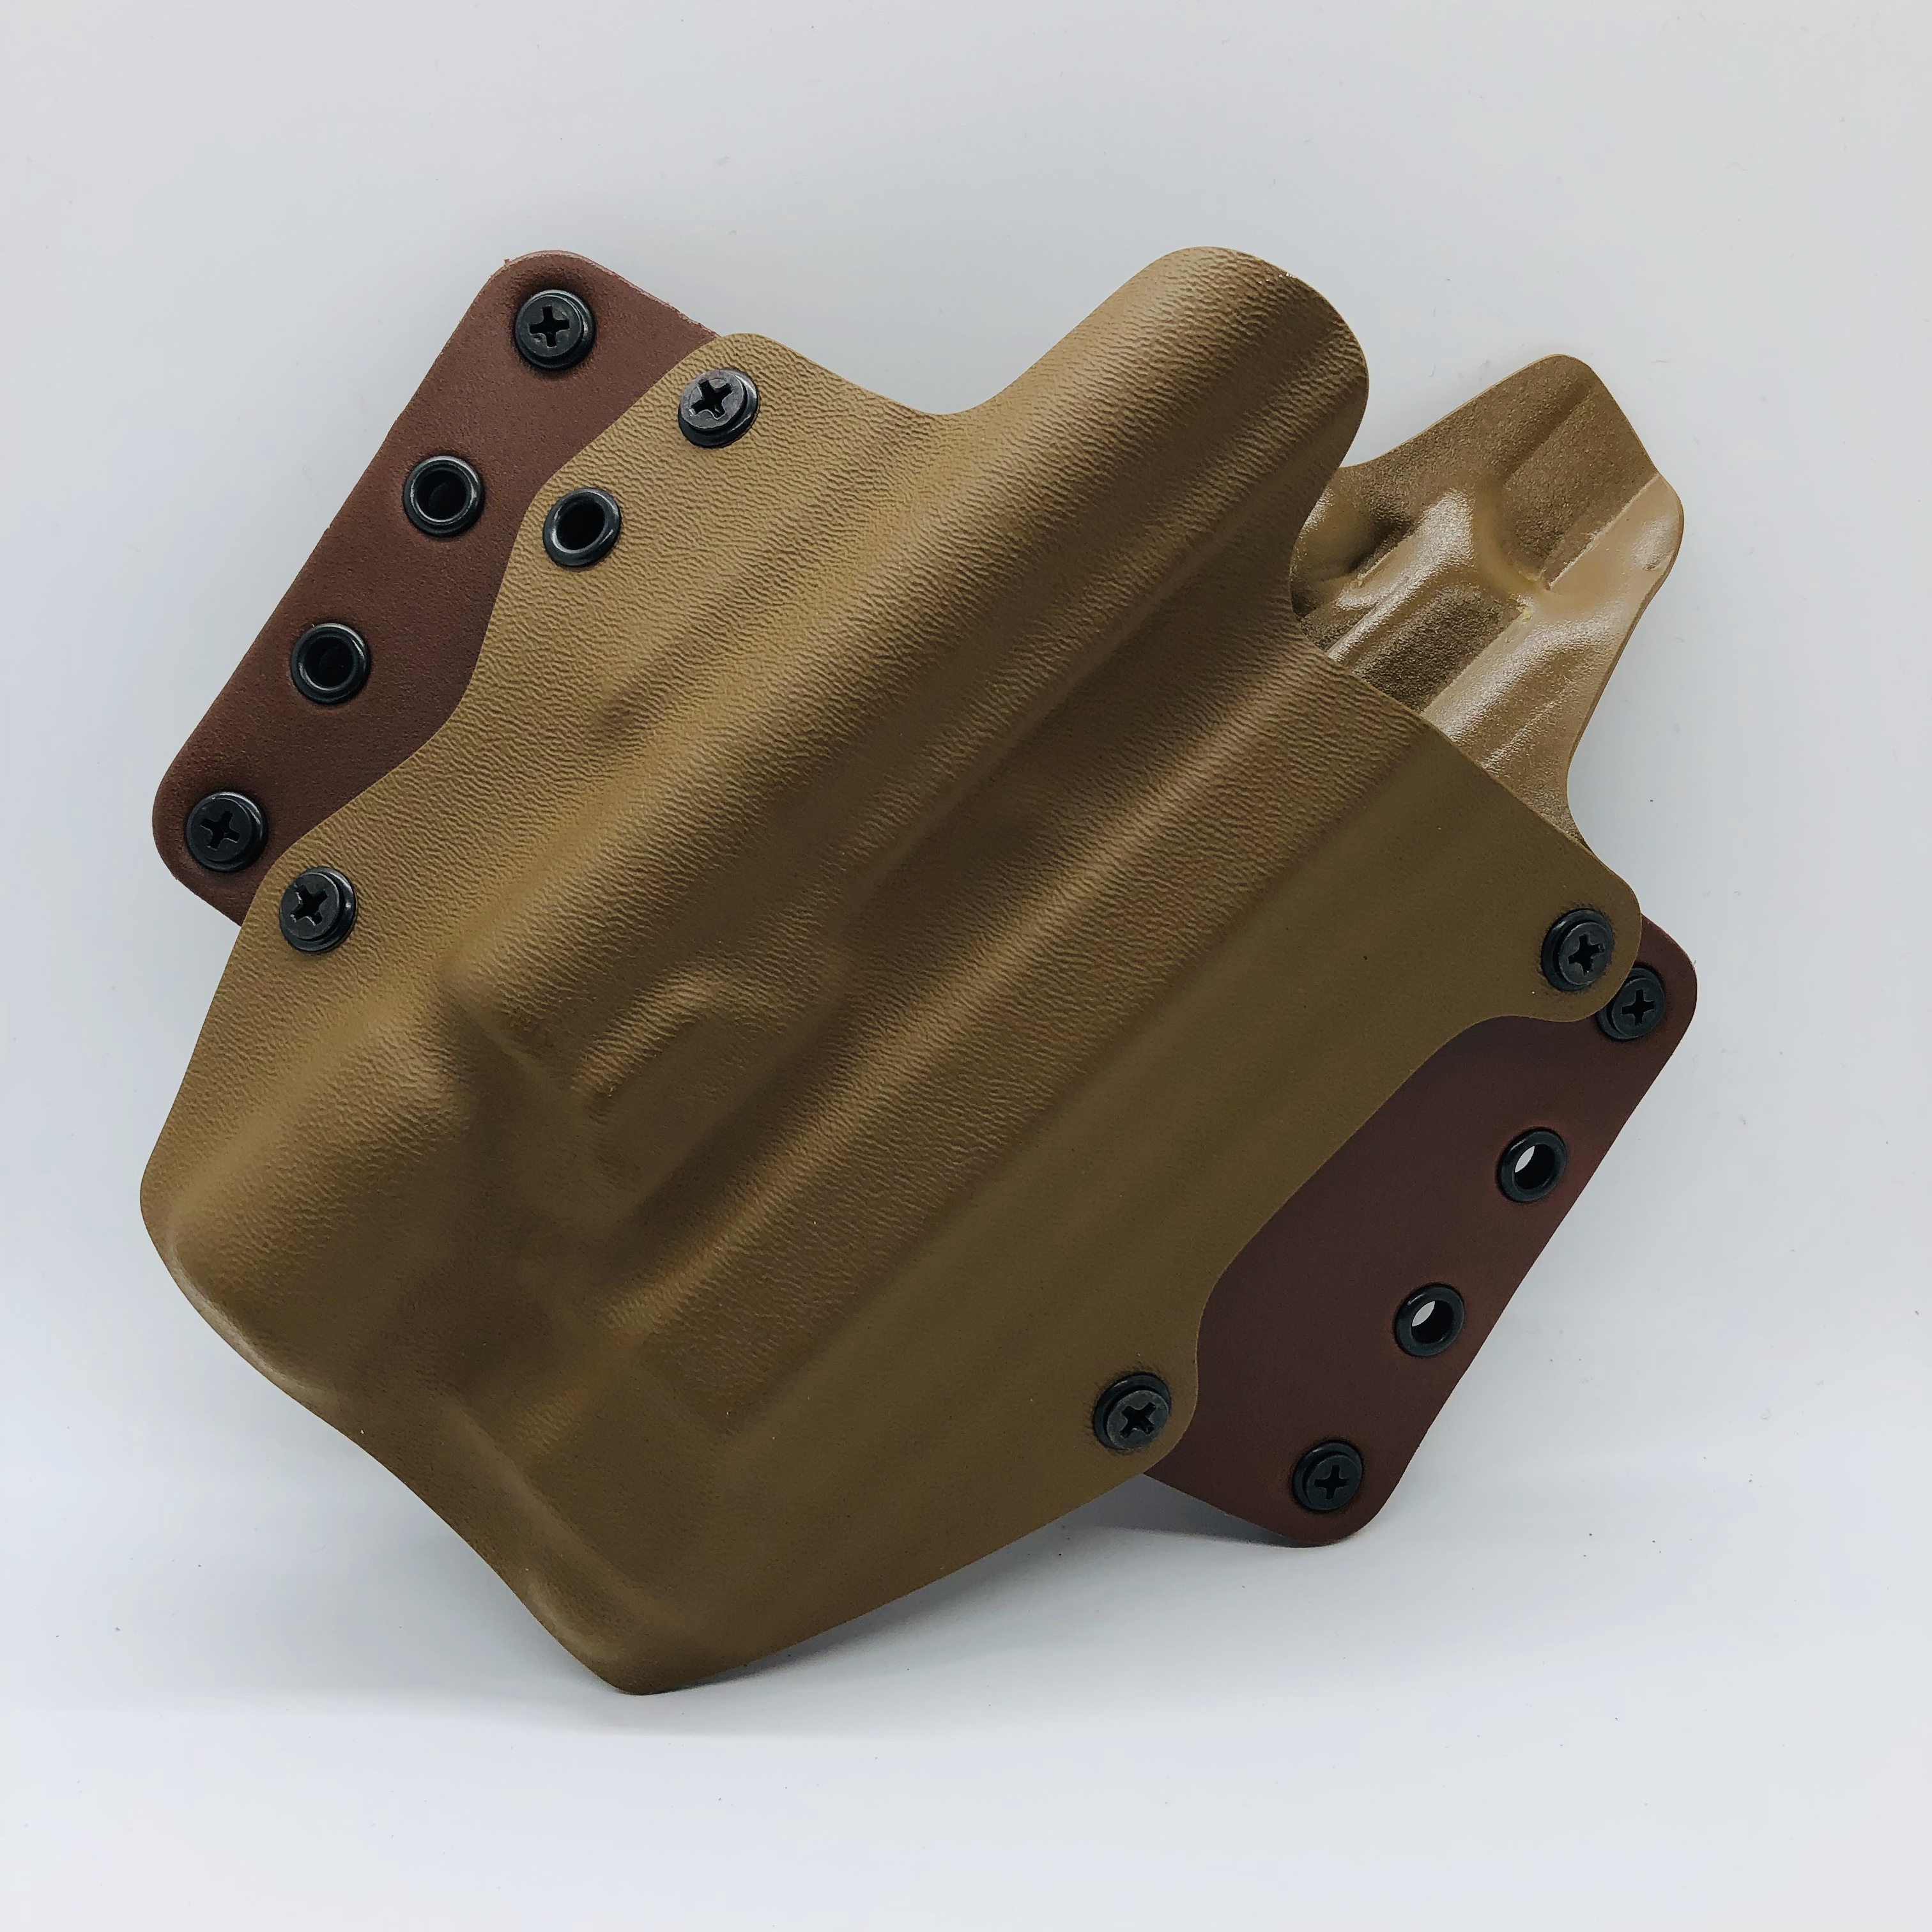 Blackpoint Tactical 118051 Leather Wing Light Mounted OWB 1.75" Holster For Beretta 92A1 Coyote  Blackpoint Tactical 118051 Leather Wing Light Mounted OWB 1.75" Holster For Beretta 92A1 Coyote 